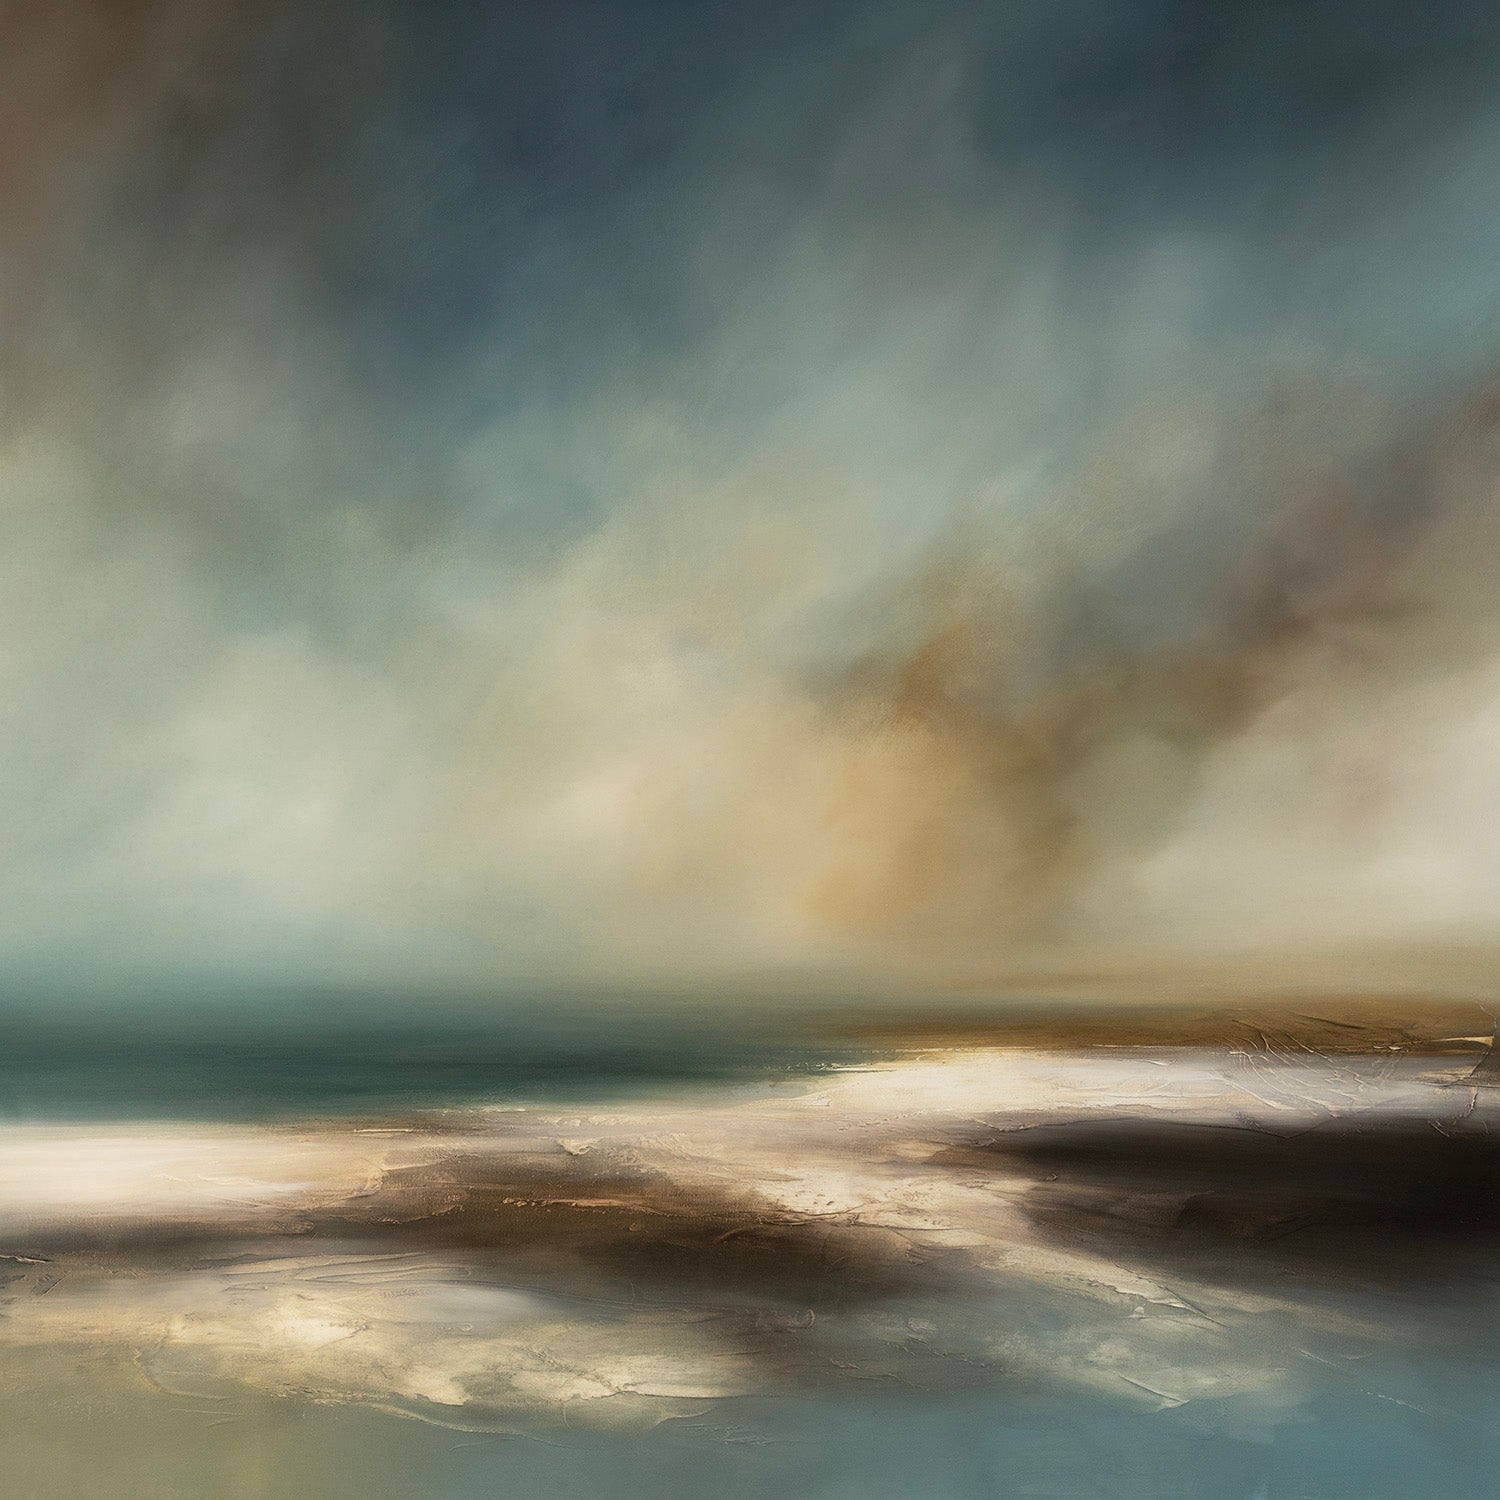 Oceans Divide, oil on canvas, by Paul Bennett, available from Padstow Gallery, Cornwall